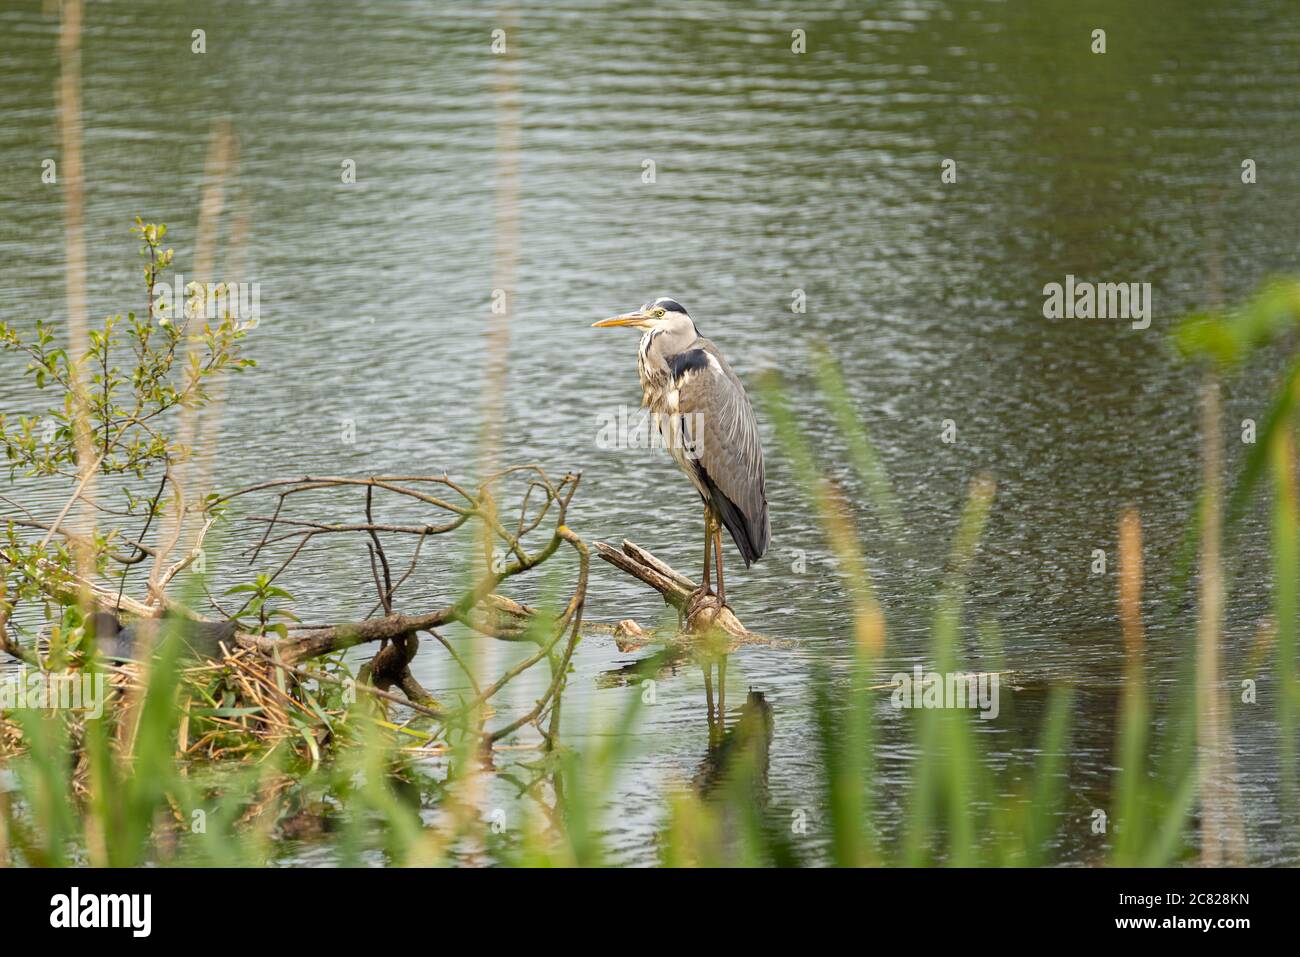 The long legged predatory Grey Heron, Ardea cinerea of the heron family Ardeidae, perched on a tree on a lake in the UK Stock Photo